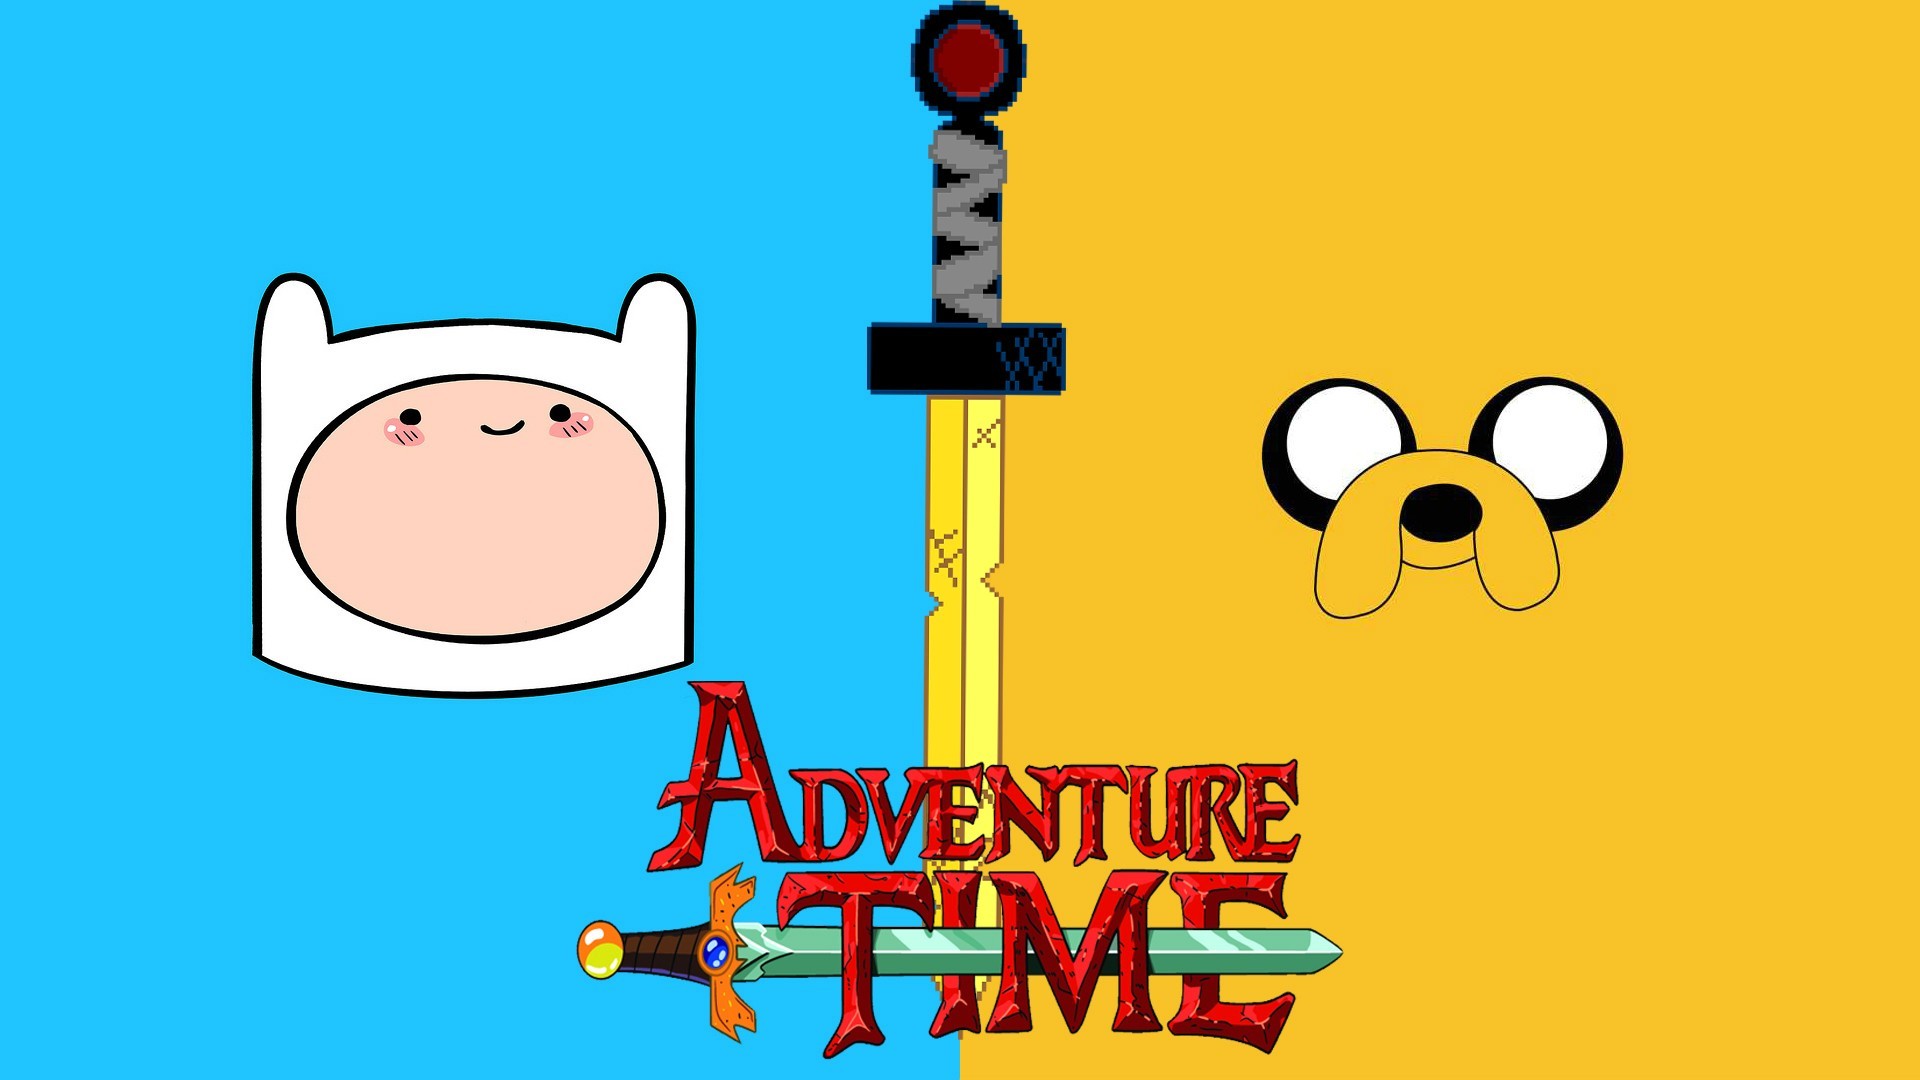 1920x1080 Adventure Time Wallpaper (33 Wallpapers)